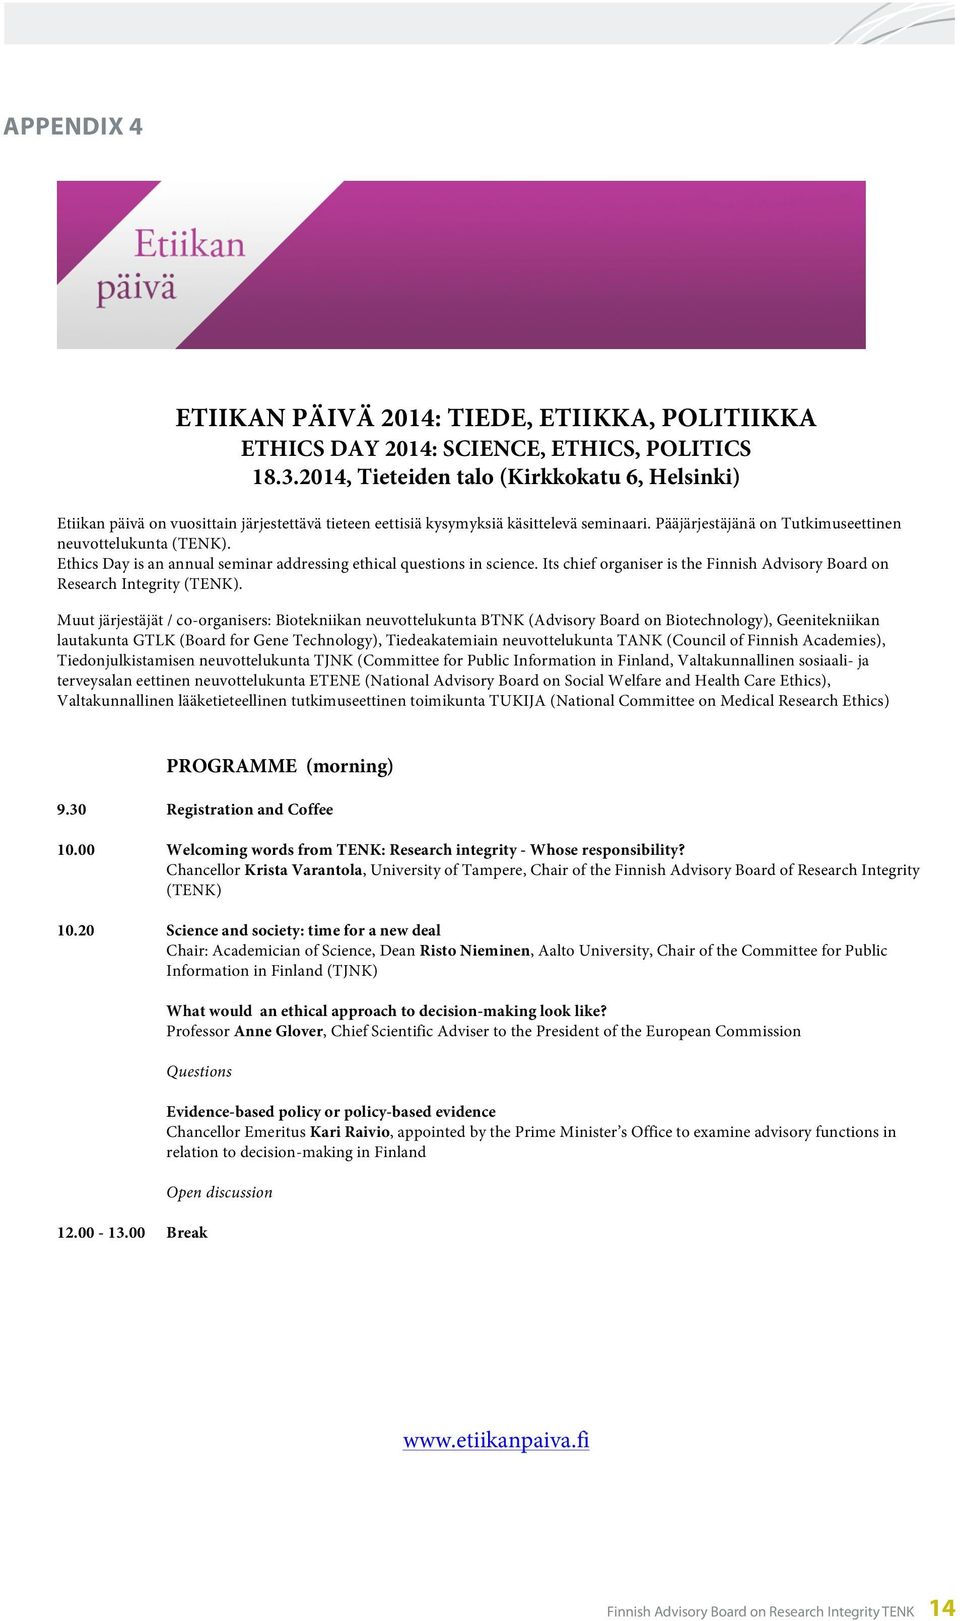 Ethics Day is an annual seminar addressing ethical questions in science. Its chief organiser is the Finnish Advisory Board on Research Integrity (TENK).